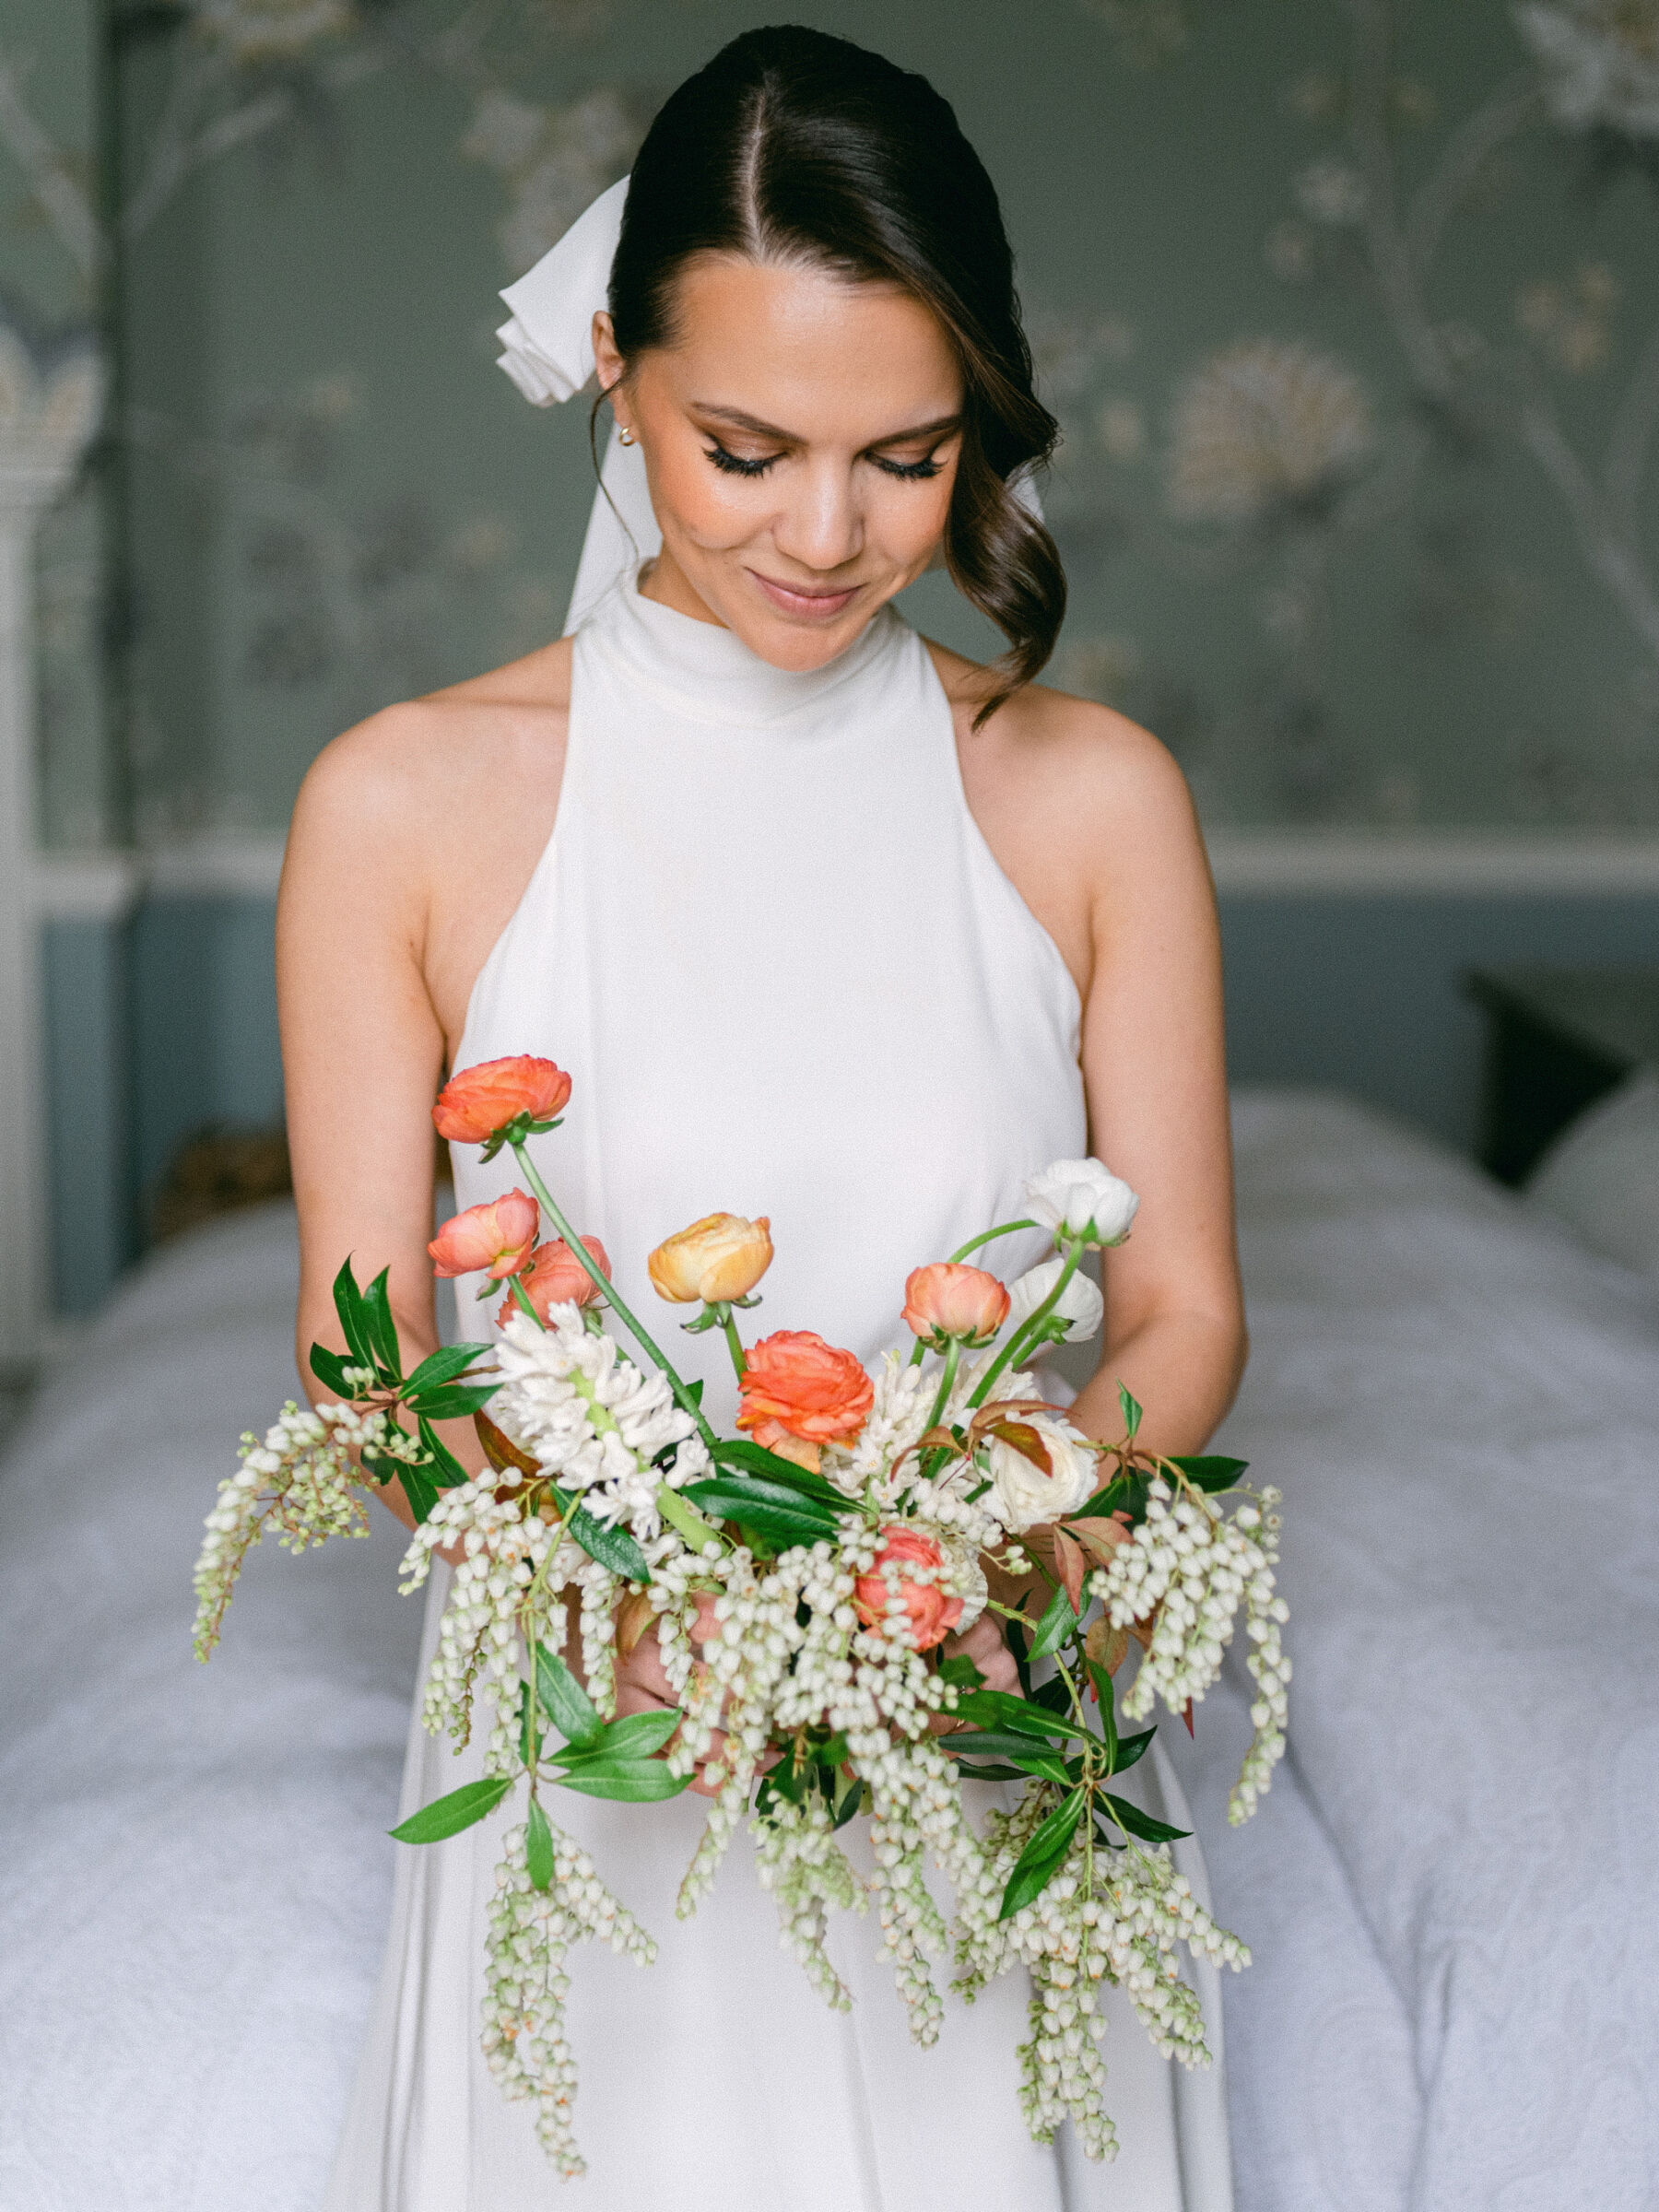 Bride wearing a halterneck wedding dress and looking down to a colourful bouquet of British grown wedding flowers.